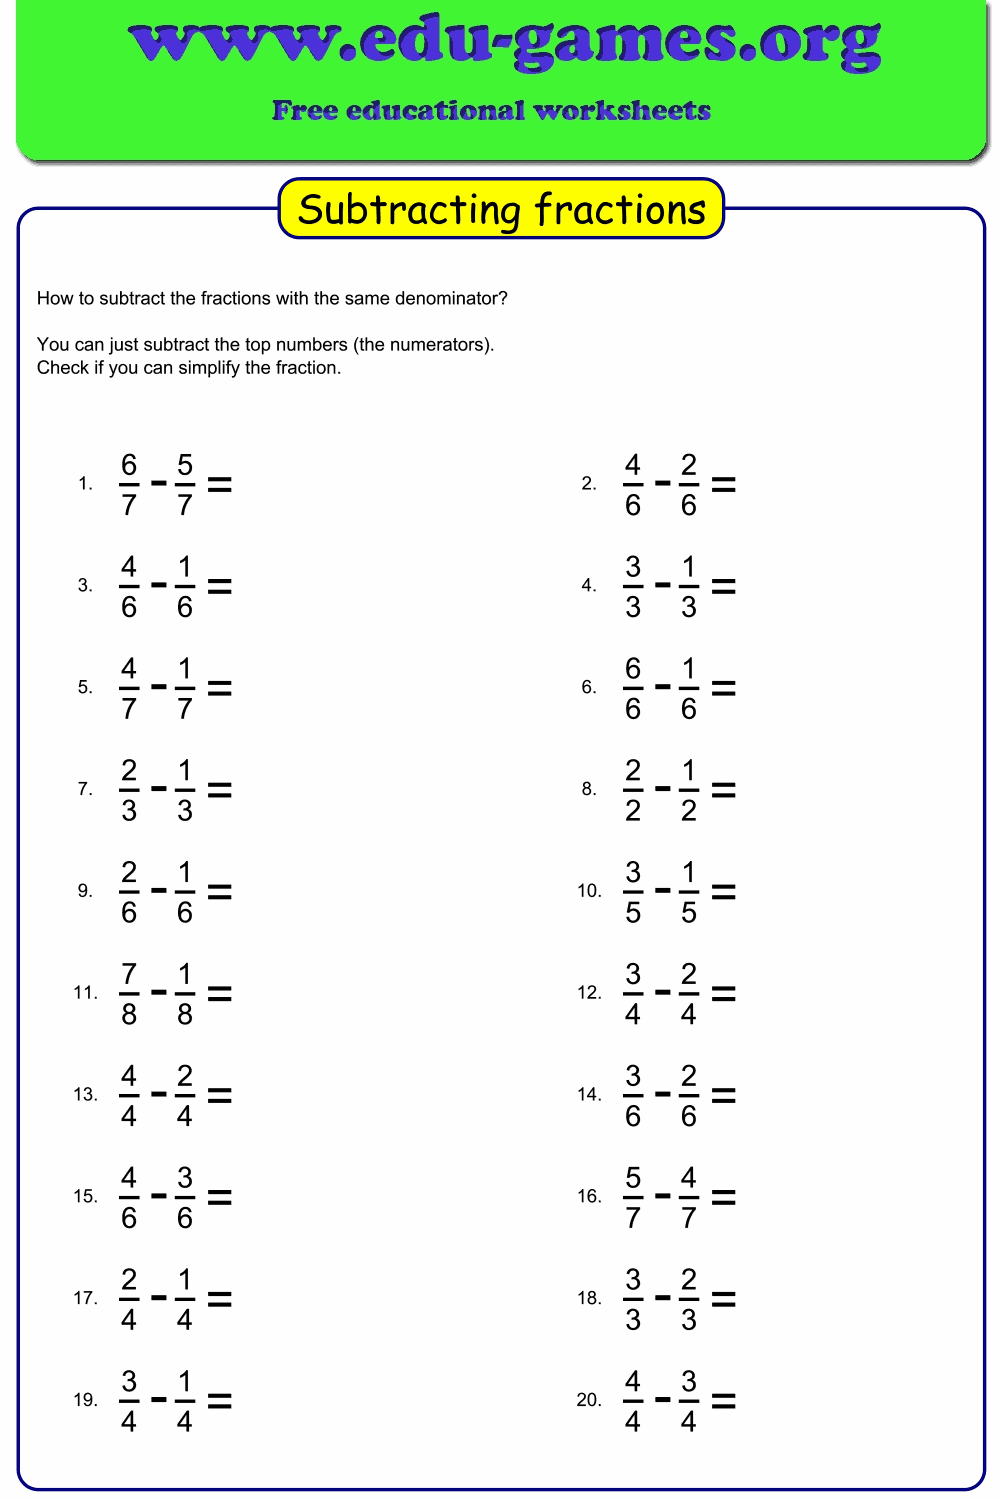 Subtracting fractions png